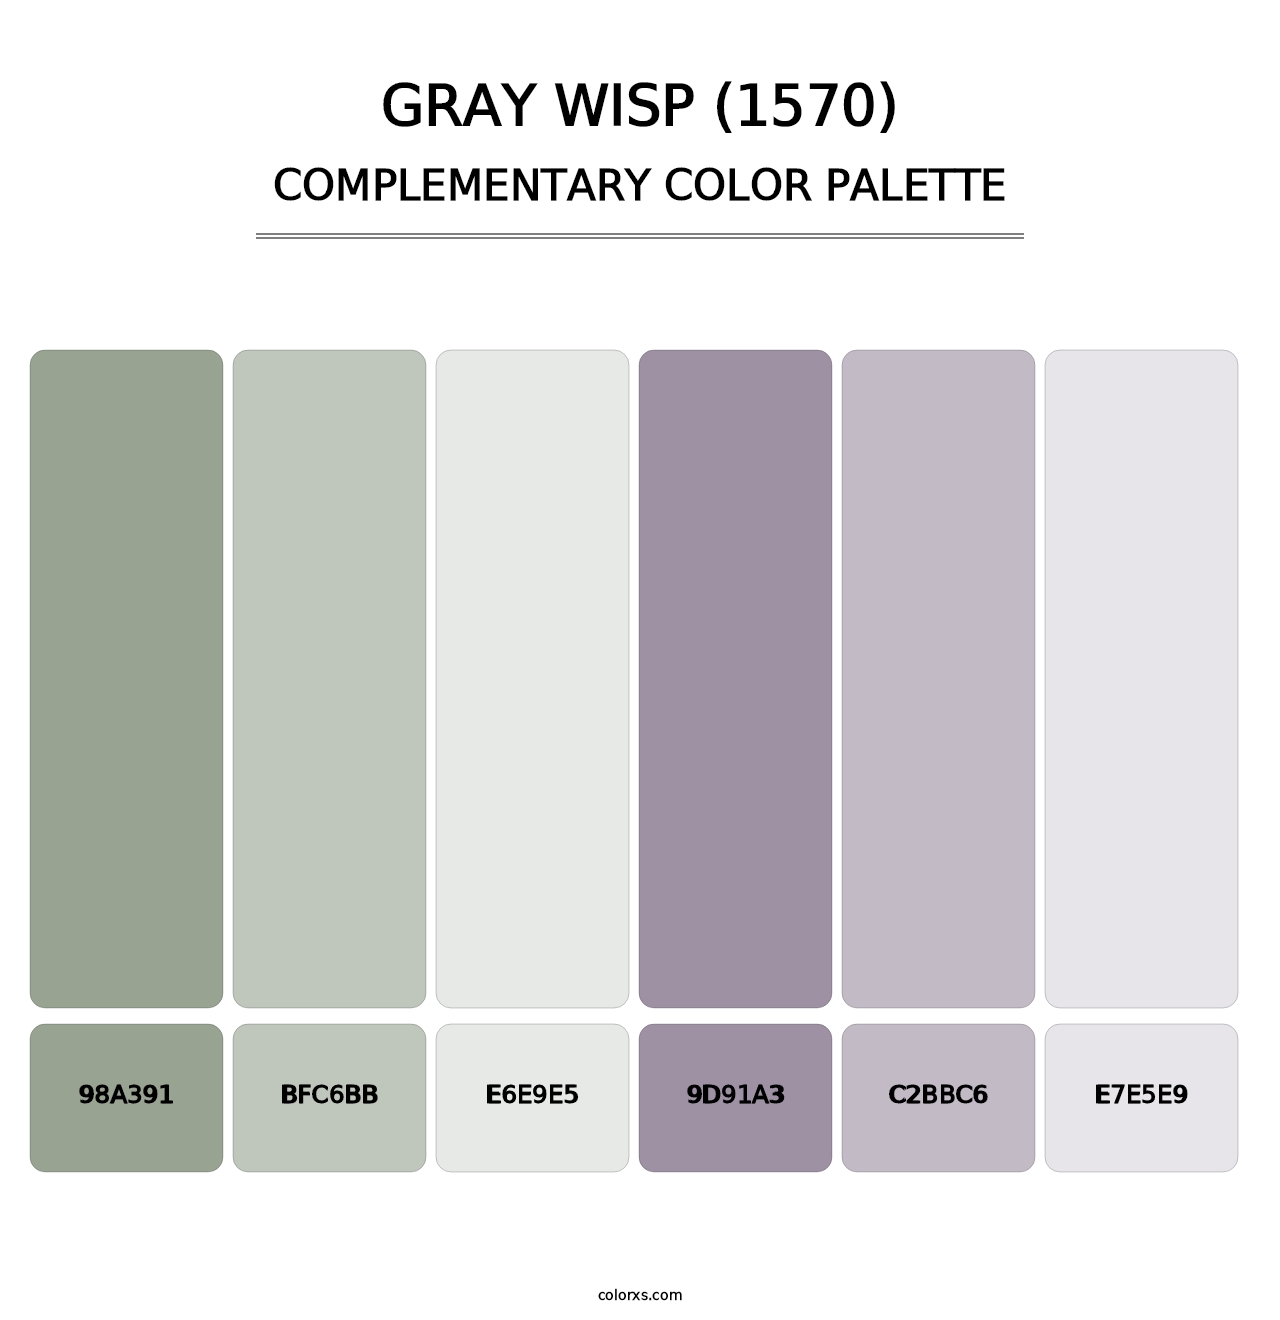 Gray Wisp (1570) - Complementary Color Palette